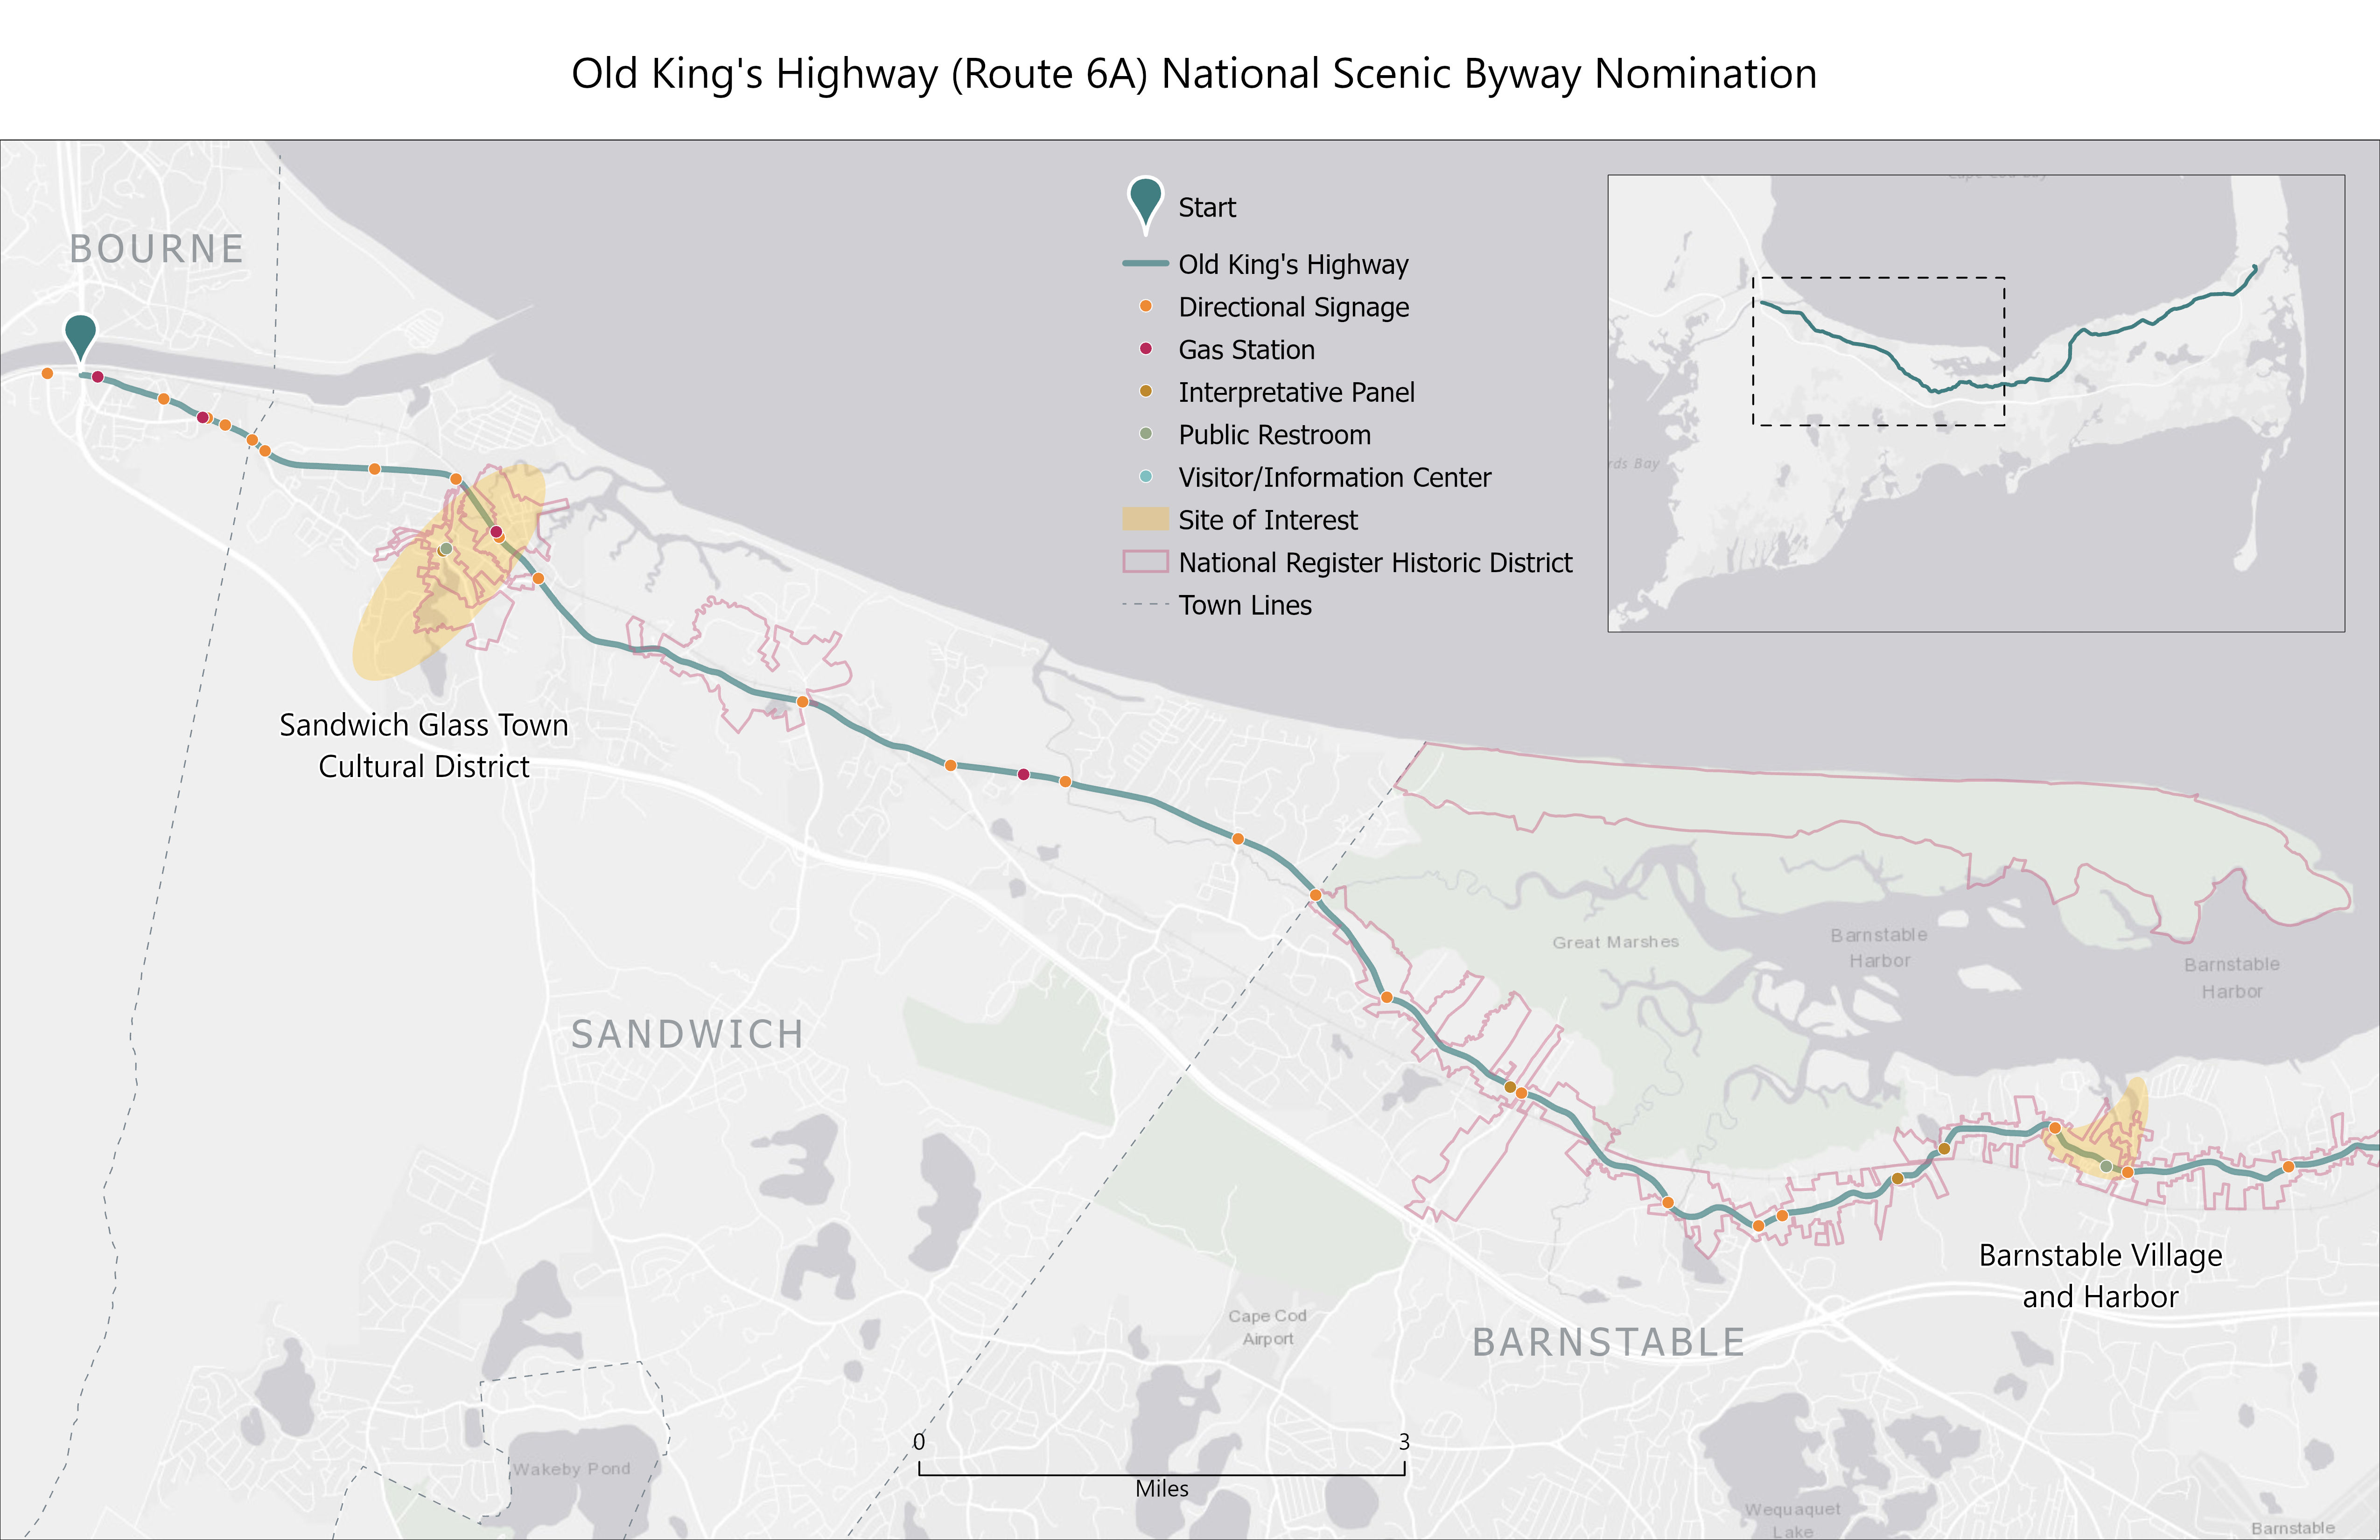 1524_3-5_Old_Kings_Highway_NSB_Nomination_Map_Page_1.jpg